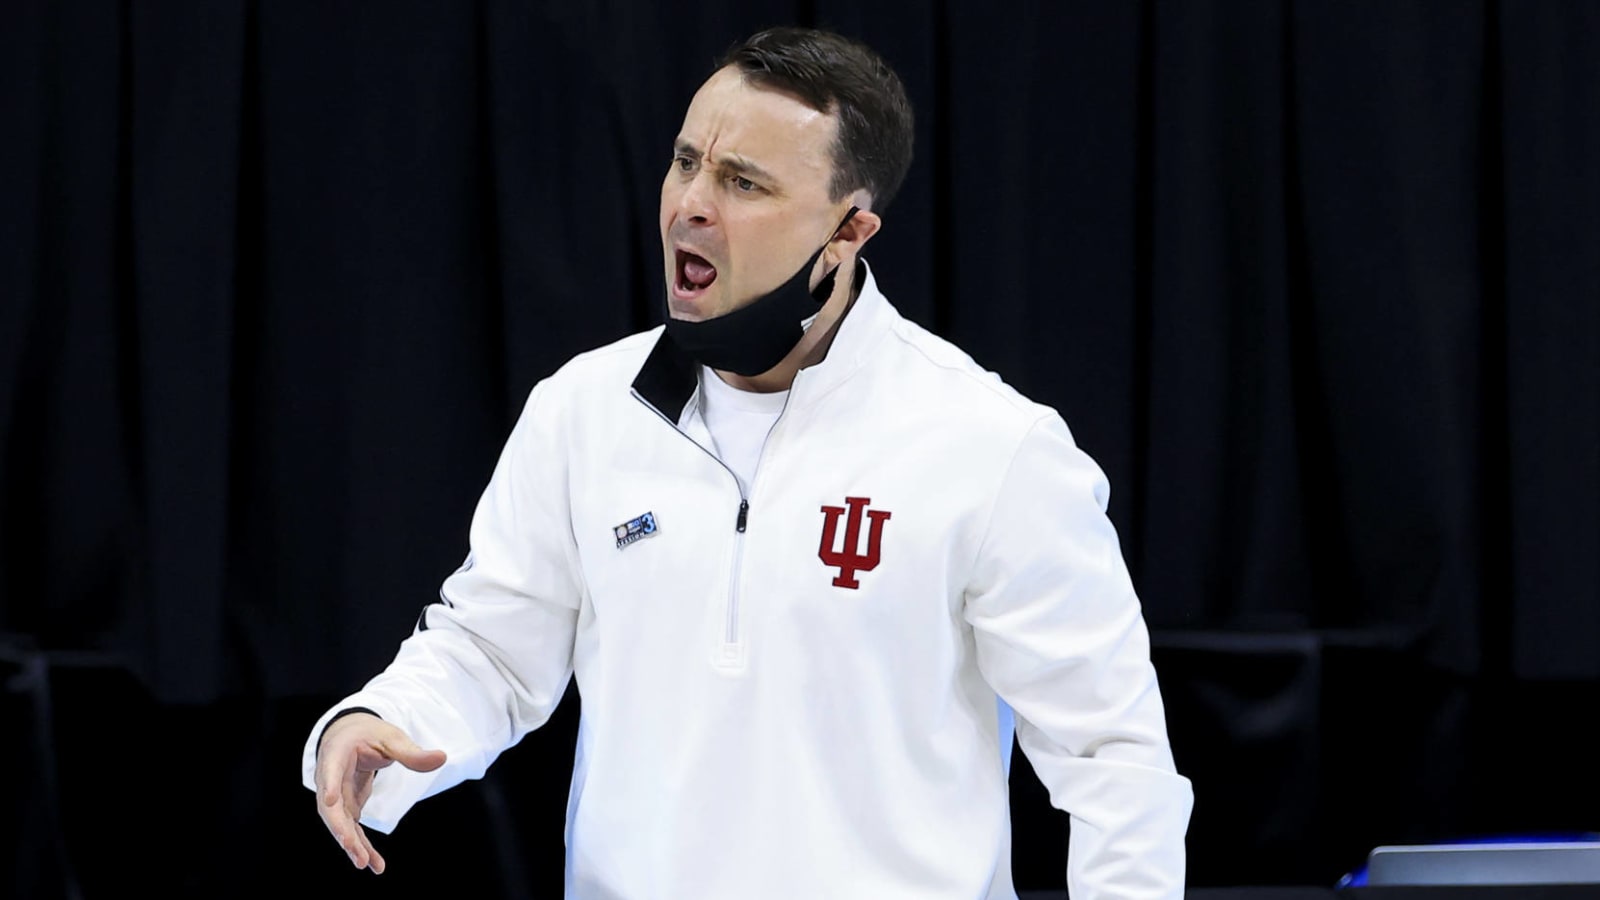 Indiana fires Archie Miller as head coach